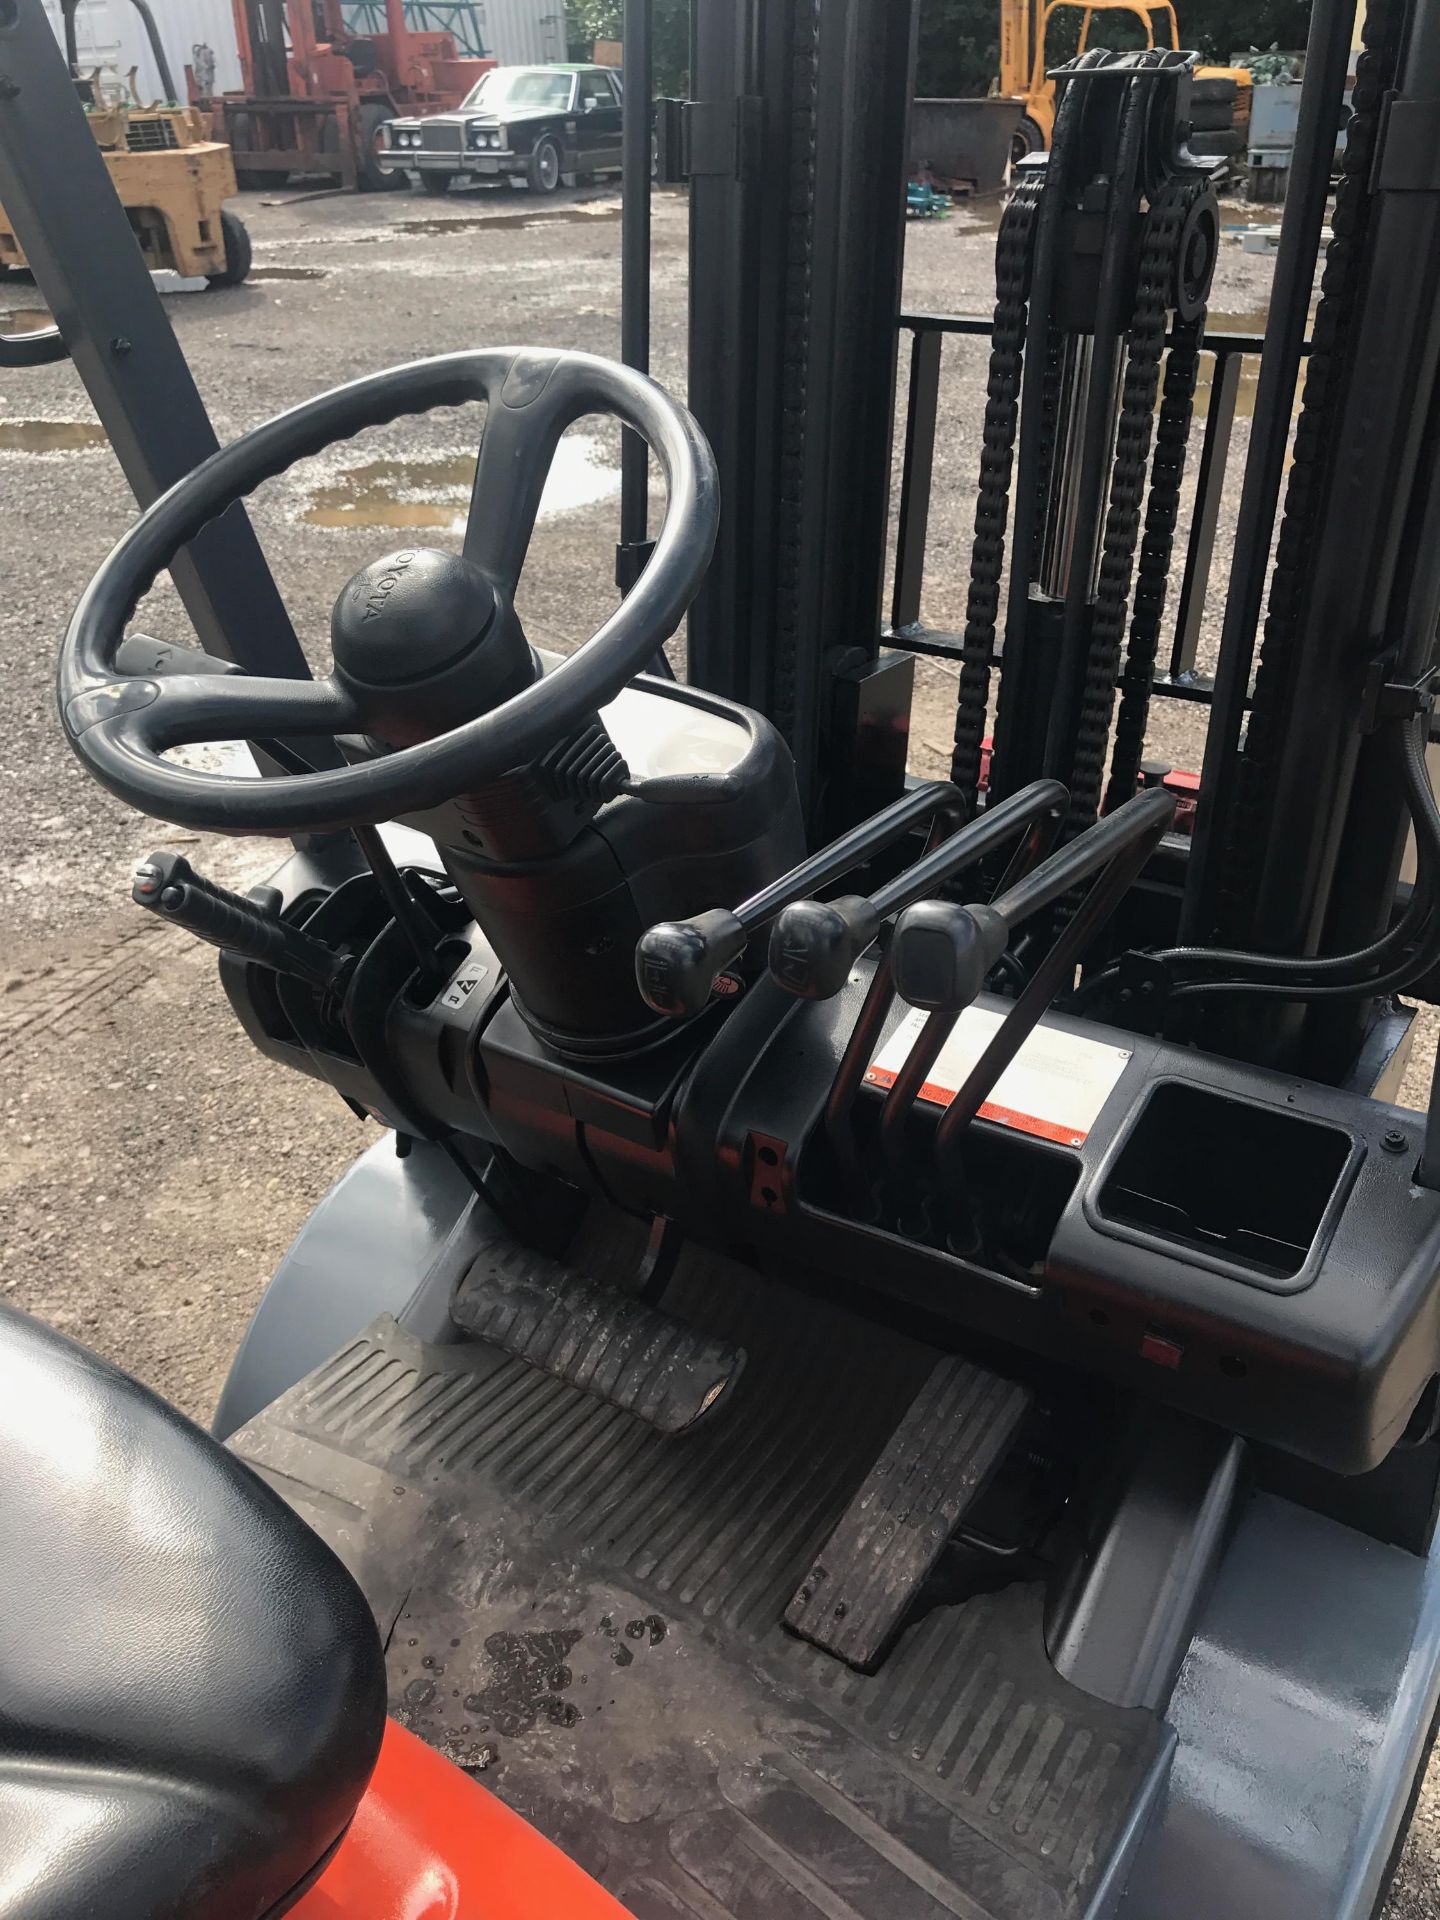 TOYOTA (6FGU-20) 4,000LBS SIDE SHIFT 3 STAGE FORKLIFT - Image 5 of 7